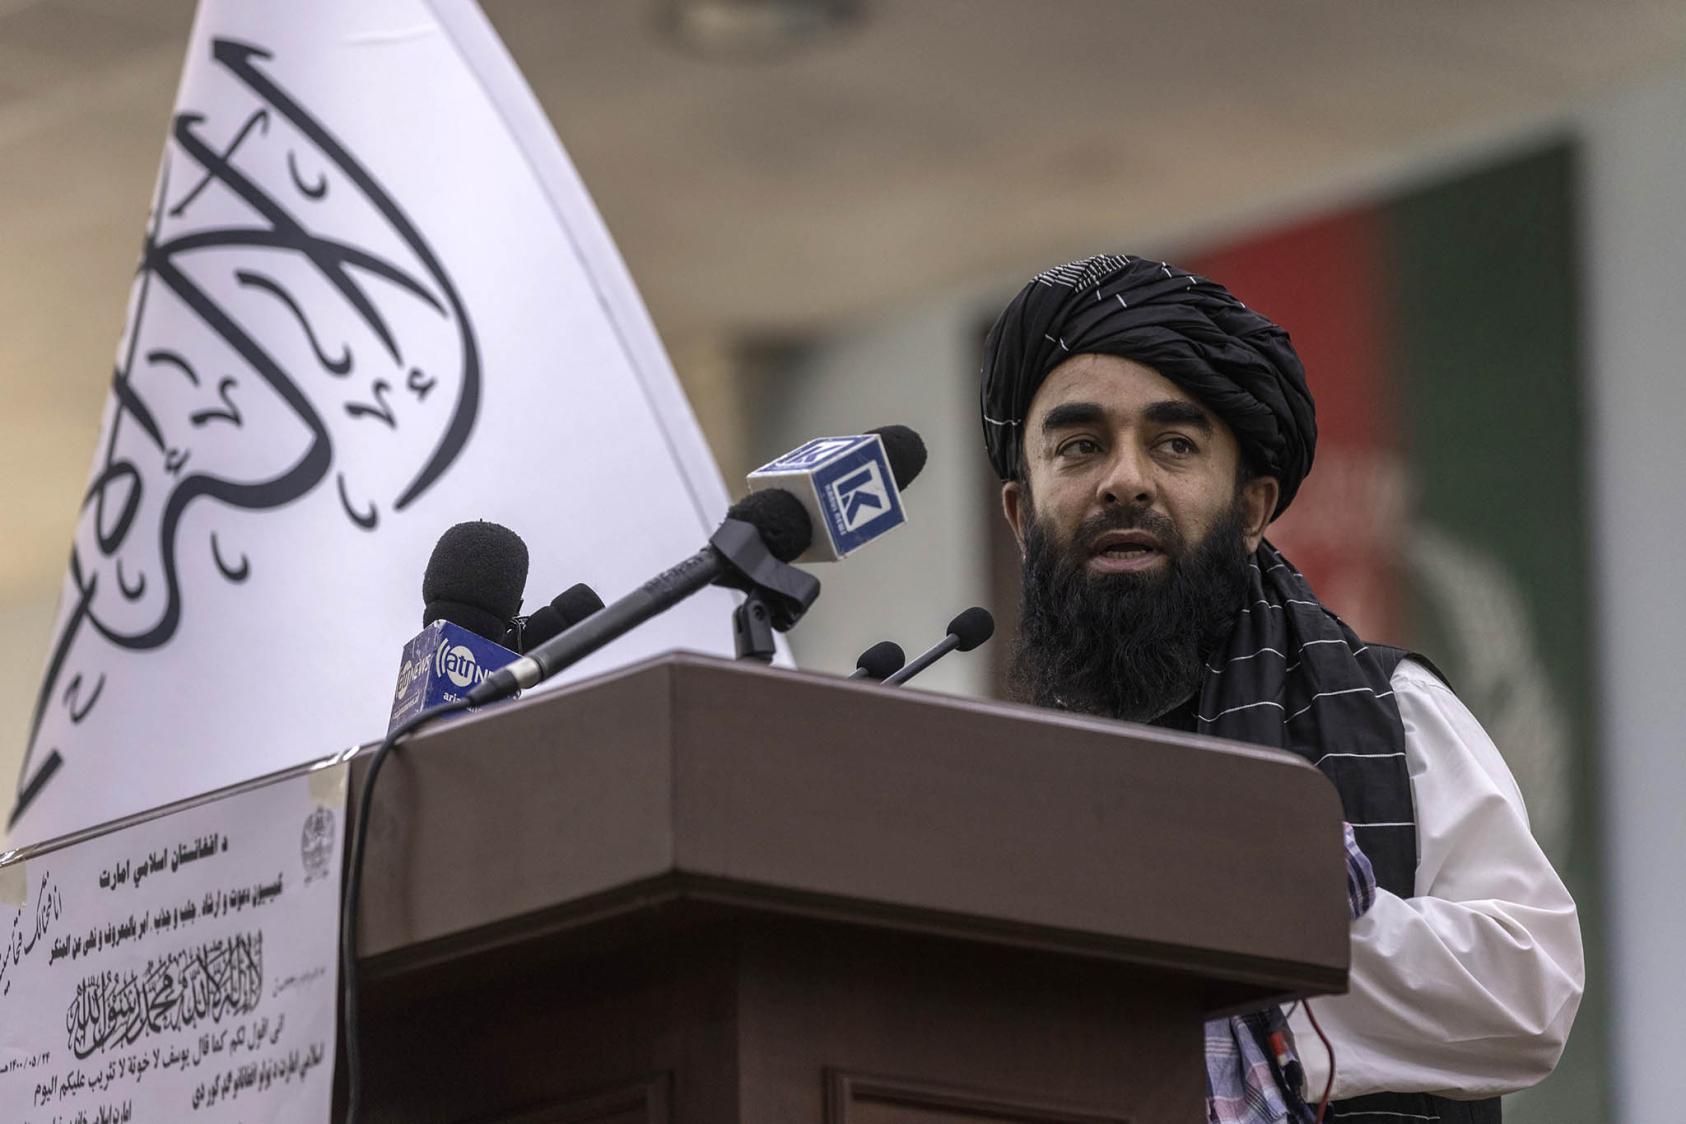 Zabihullah Mujahid, the Taliban’s chief spokesman who led its delegation at the Doha 3 meeting, speaks before hundreds of religious leaders at the Loya Jirga Hall in Kabul, Afghanistan, on Monday, Aug. 23, 2021. (Victor J. Blue/The New York Times)